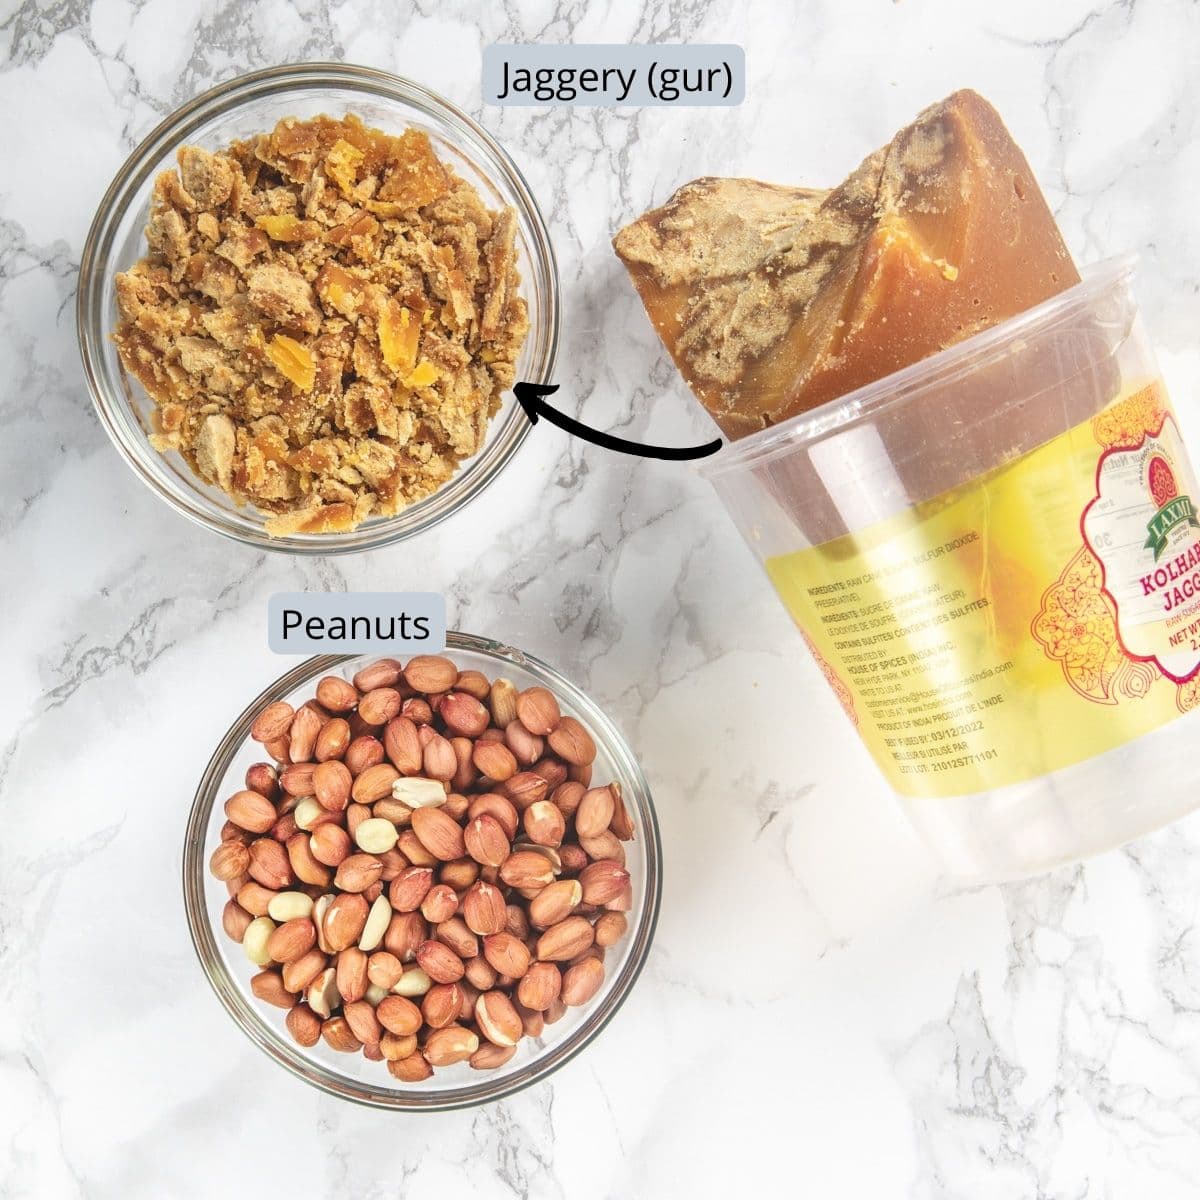 Image of ingredients used in making chikki in indivial bowl and block of jaggery.